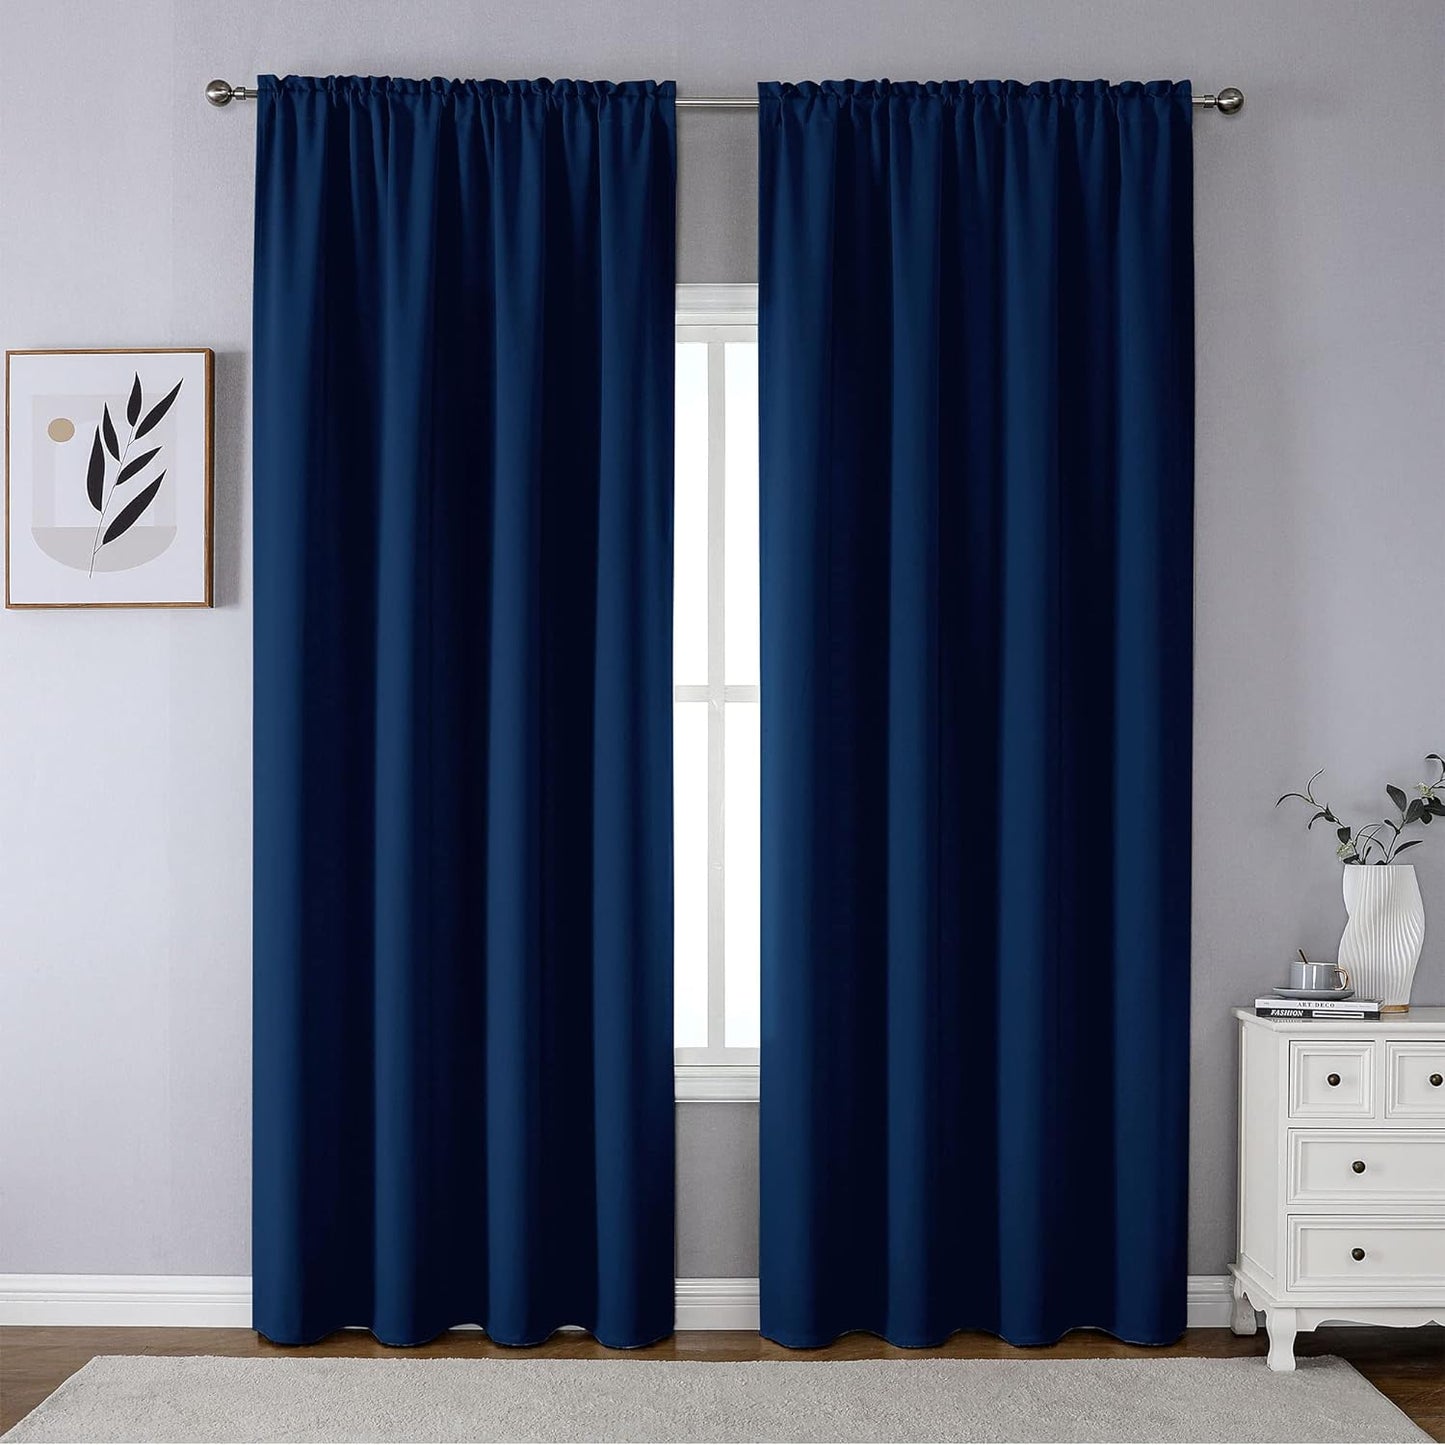 CUCRAF Blackout Curtains 84 Inches Long for Living Room, Light Beige Room Darkening Window Curtain Panels, Rod Pocket Thermal Insulated Solid Drapes for Bedroom, 52X84 Inch, Set of 2 Panels  CUCRAF Royal Blue 52W X 95L Inch 2 Panels 